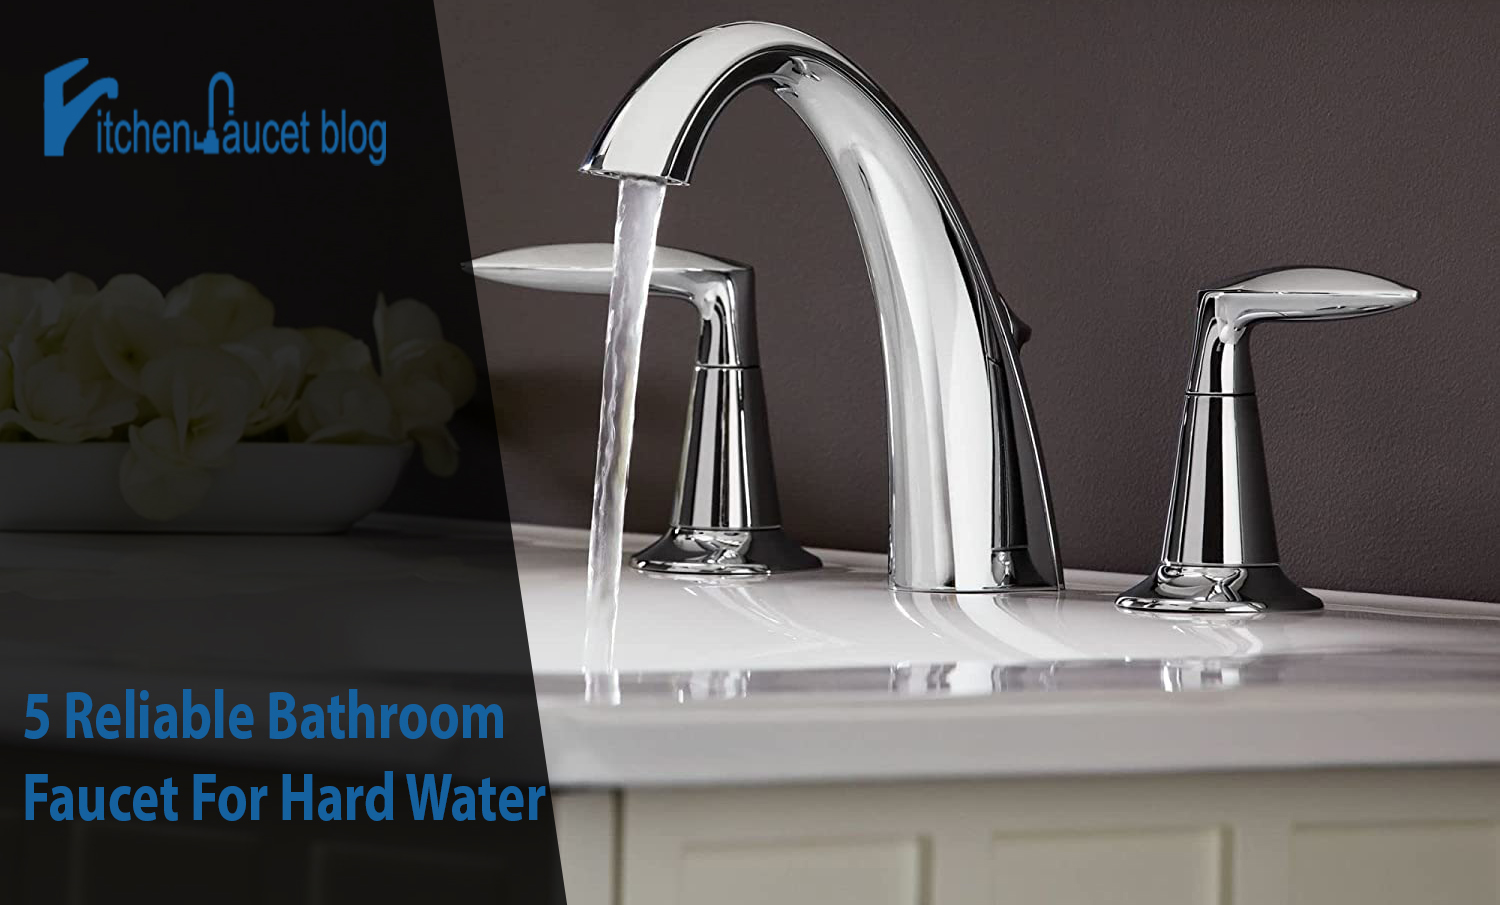 5 Reliable Bathroom Faucet For Hard Water